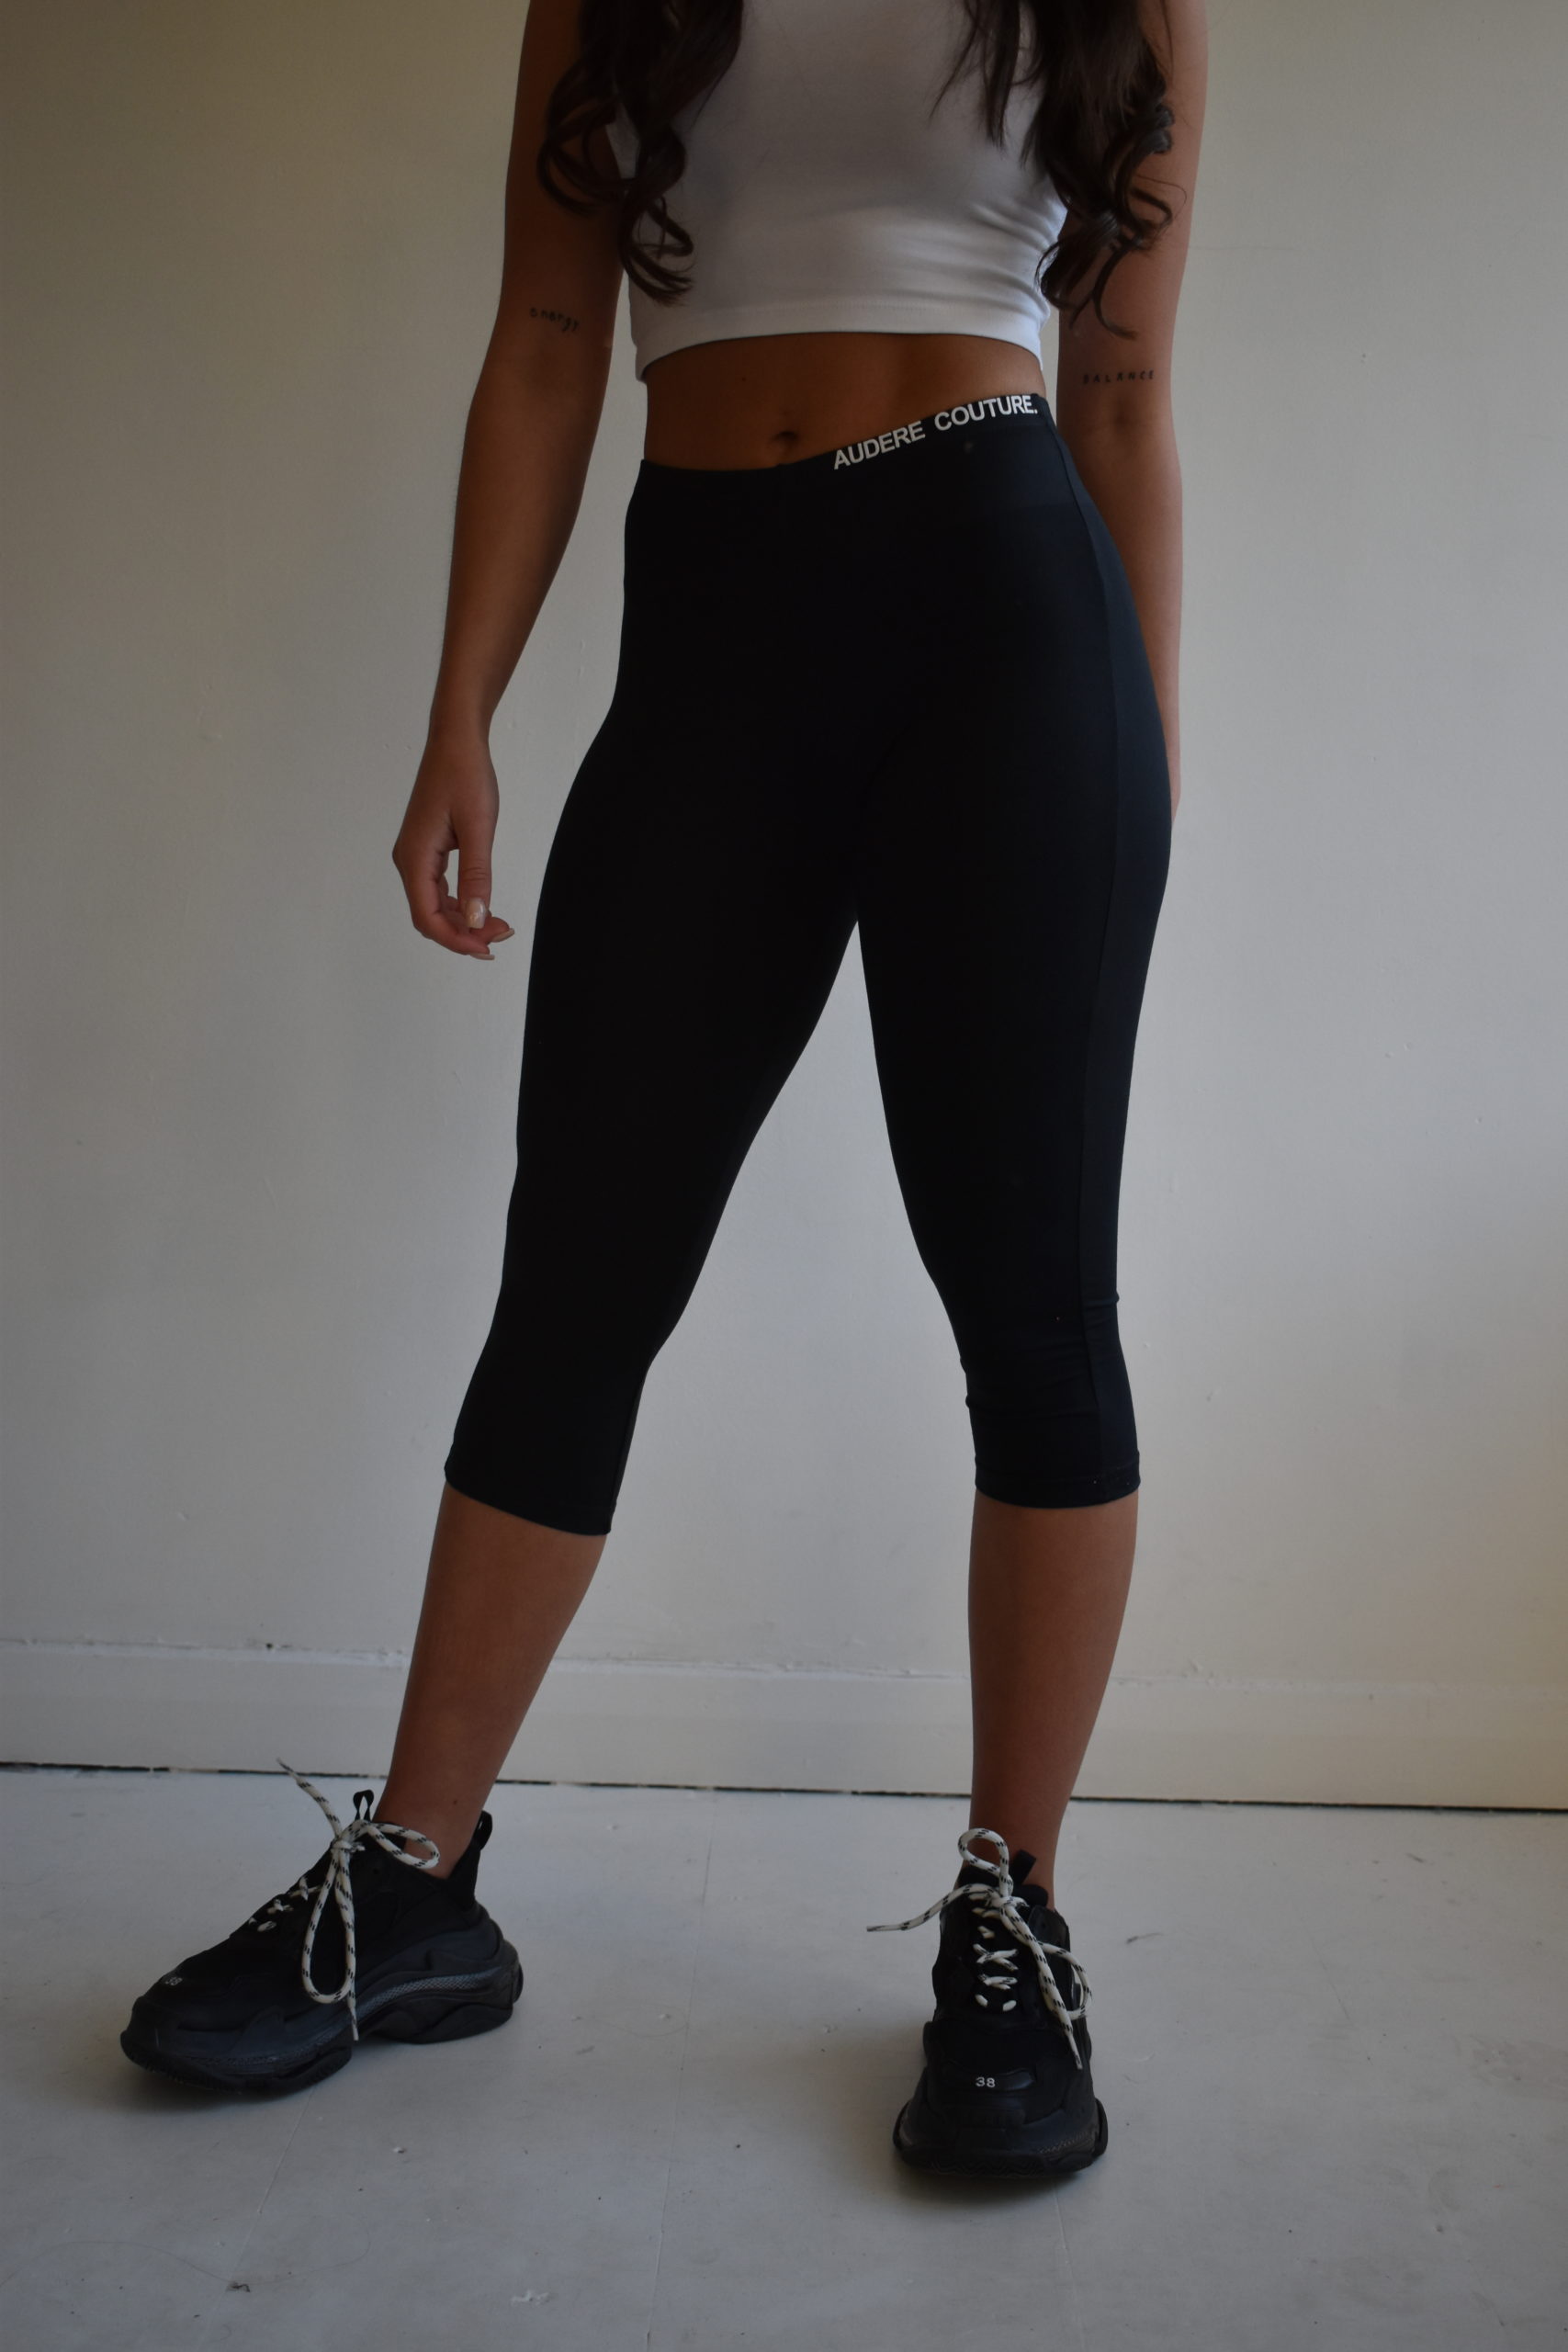 Black Soft Style Gym Leggings – Audere Couture